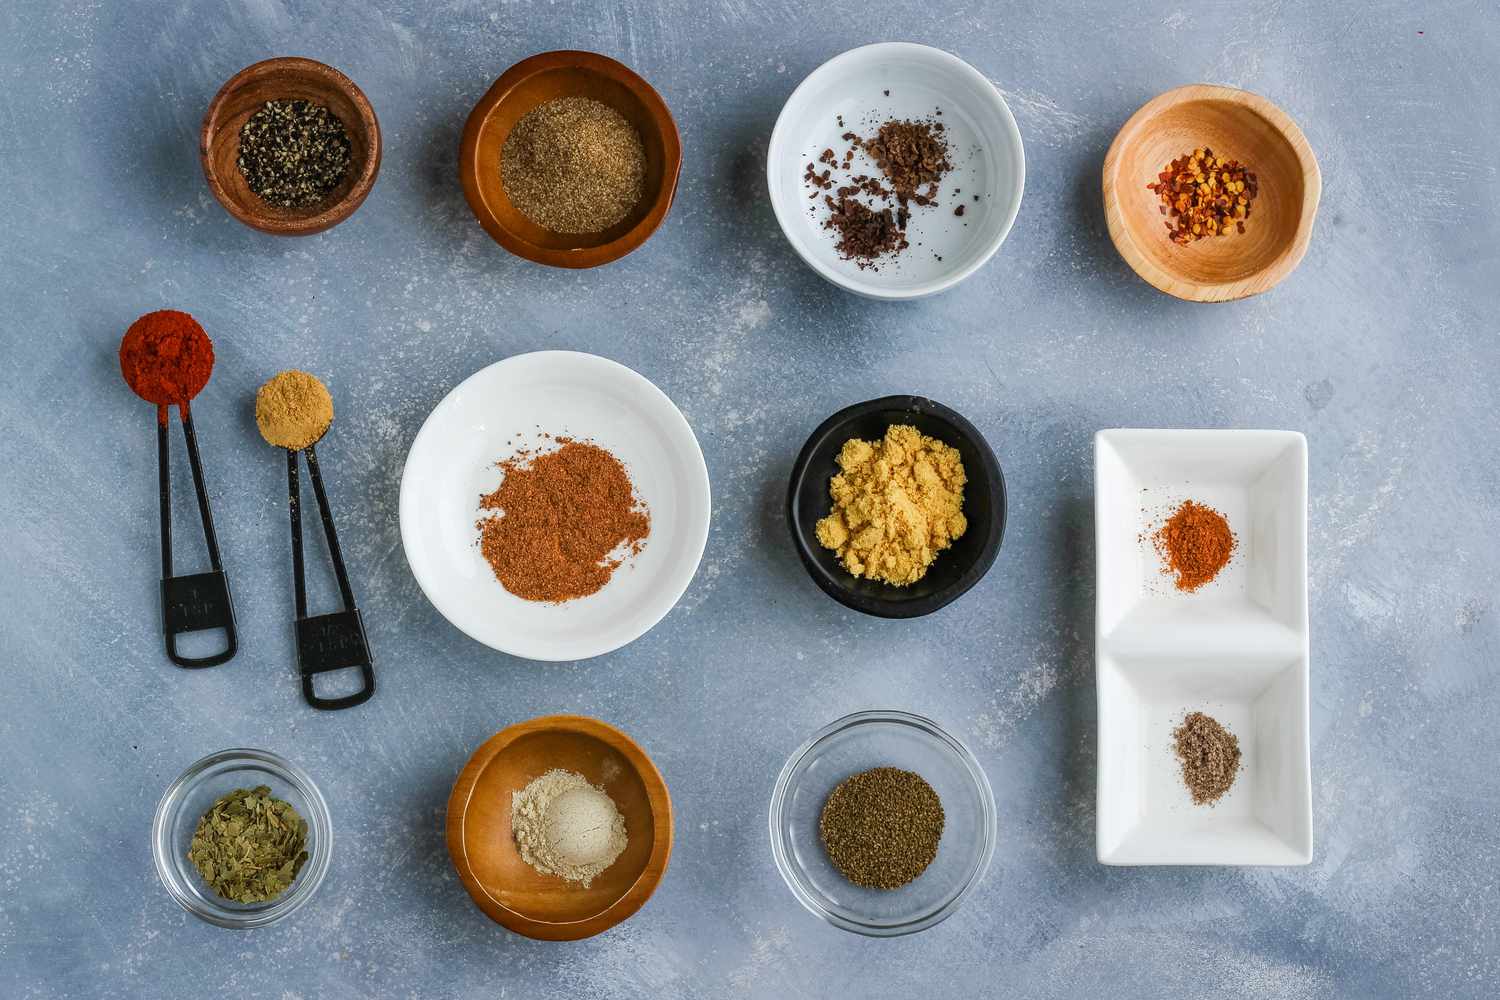 Ingredients for Old Bay-style seasoning recipe gathered